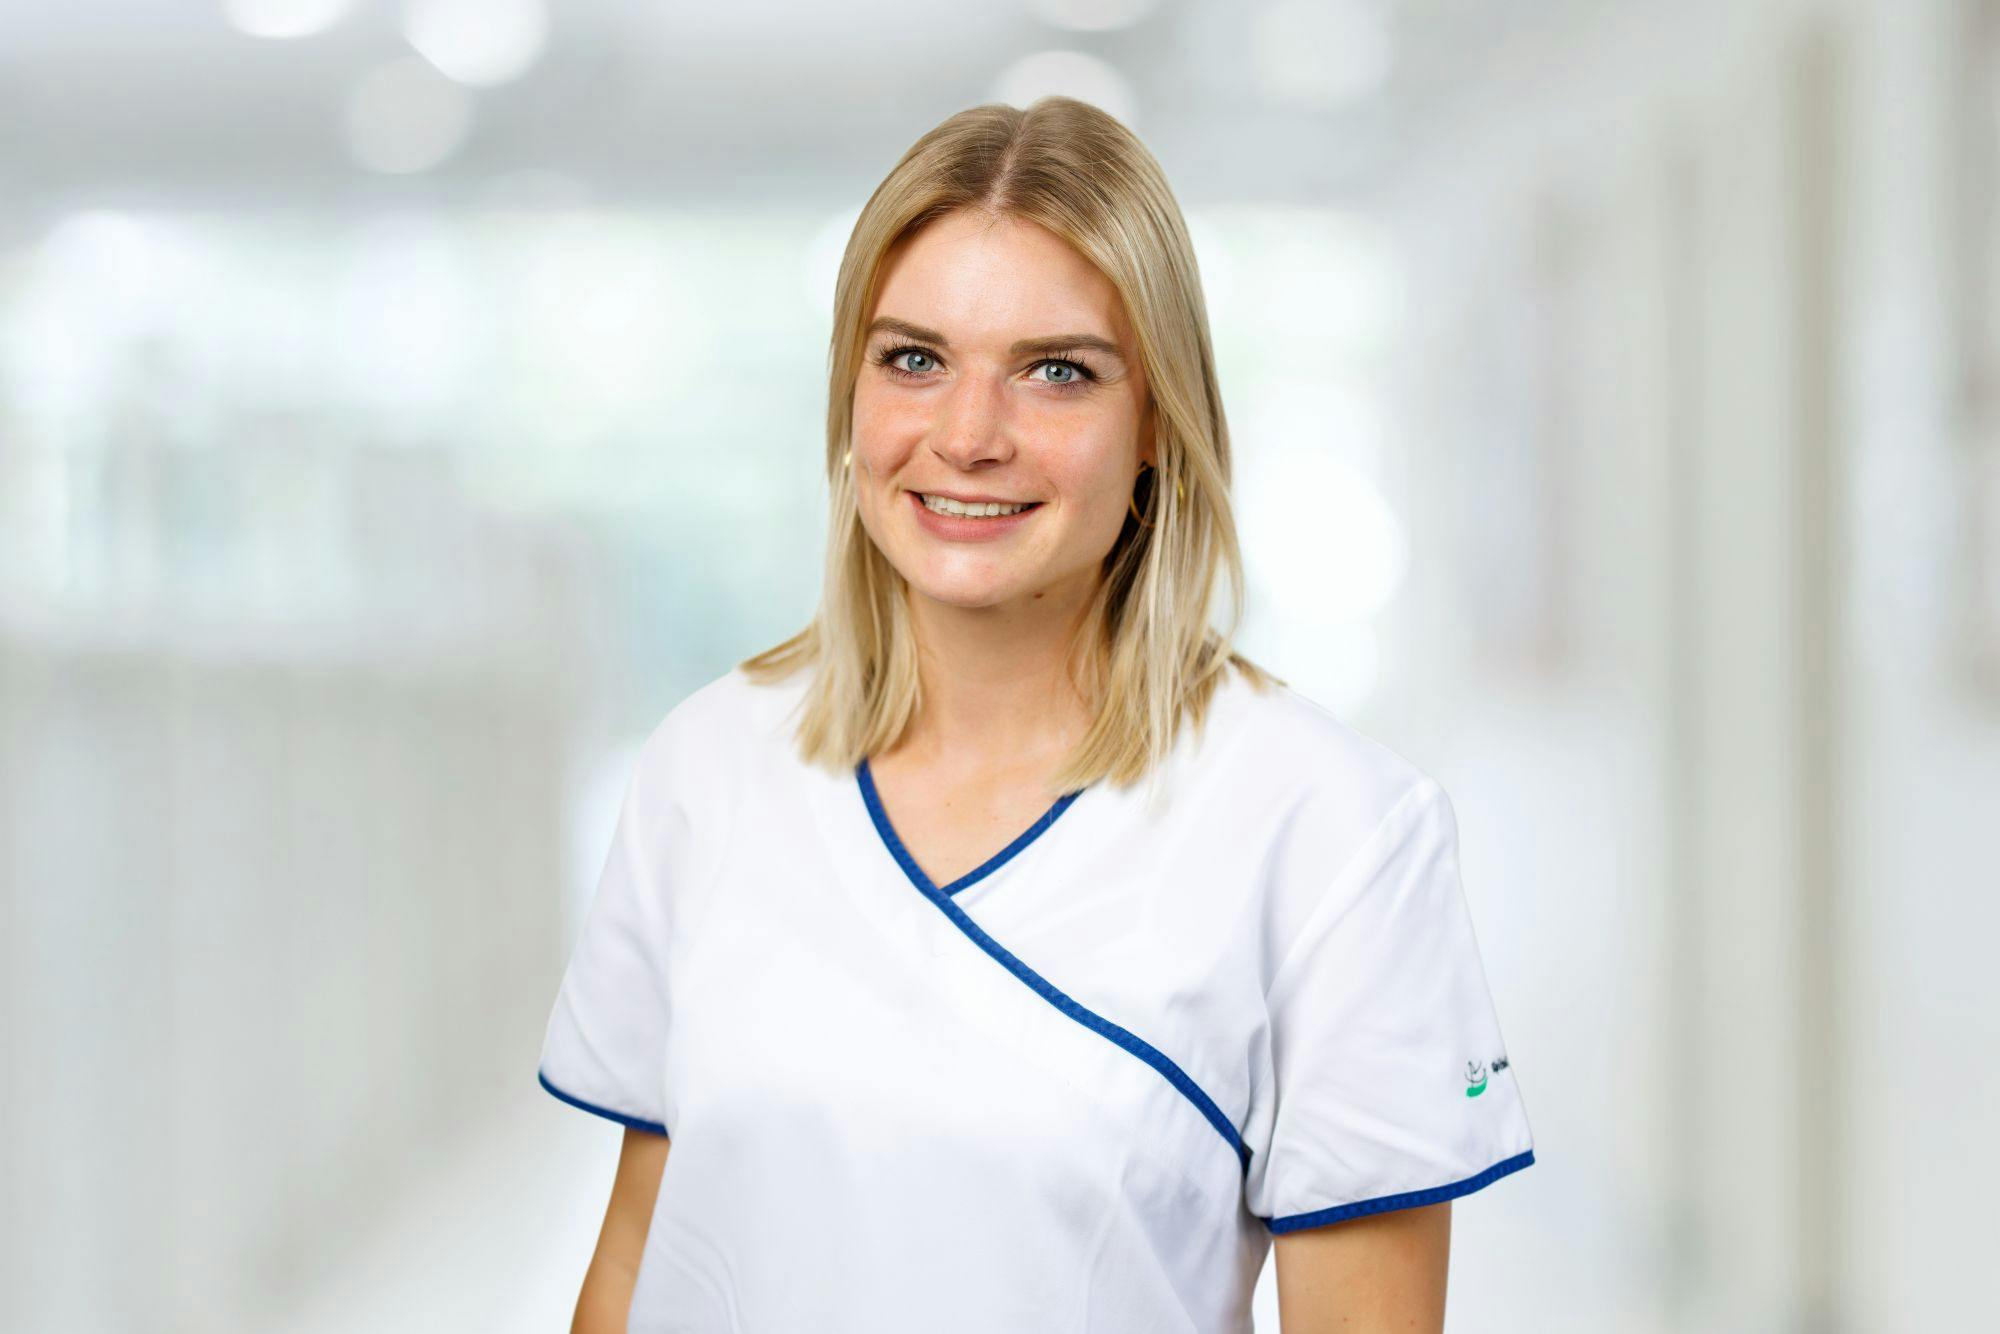 Young smiling woman in medical professional clothing against a blurred background.